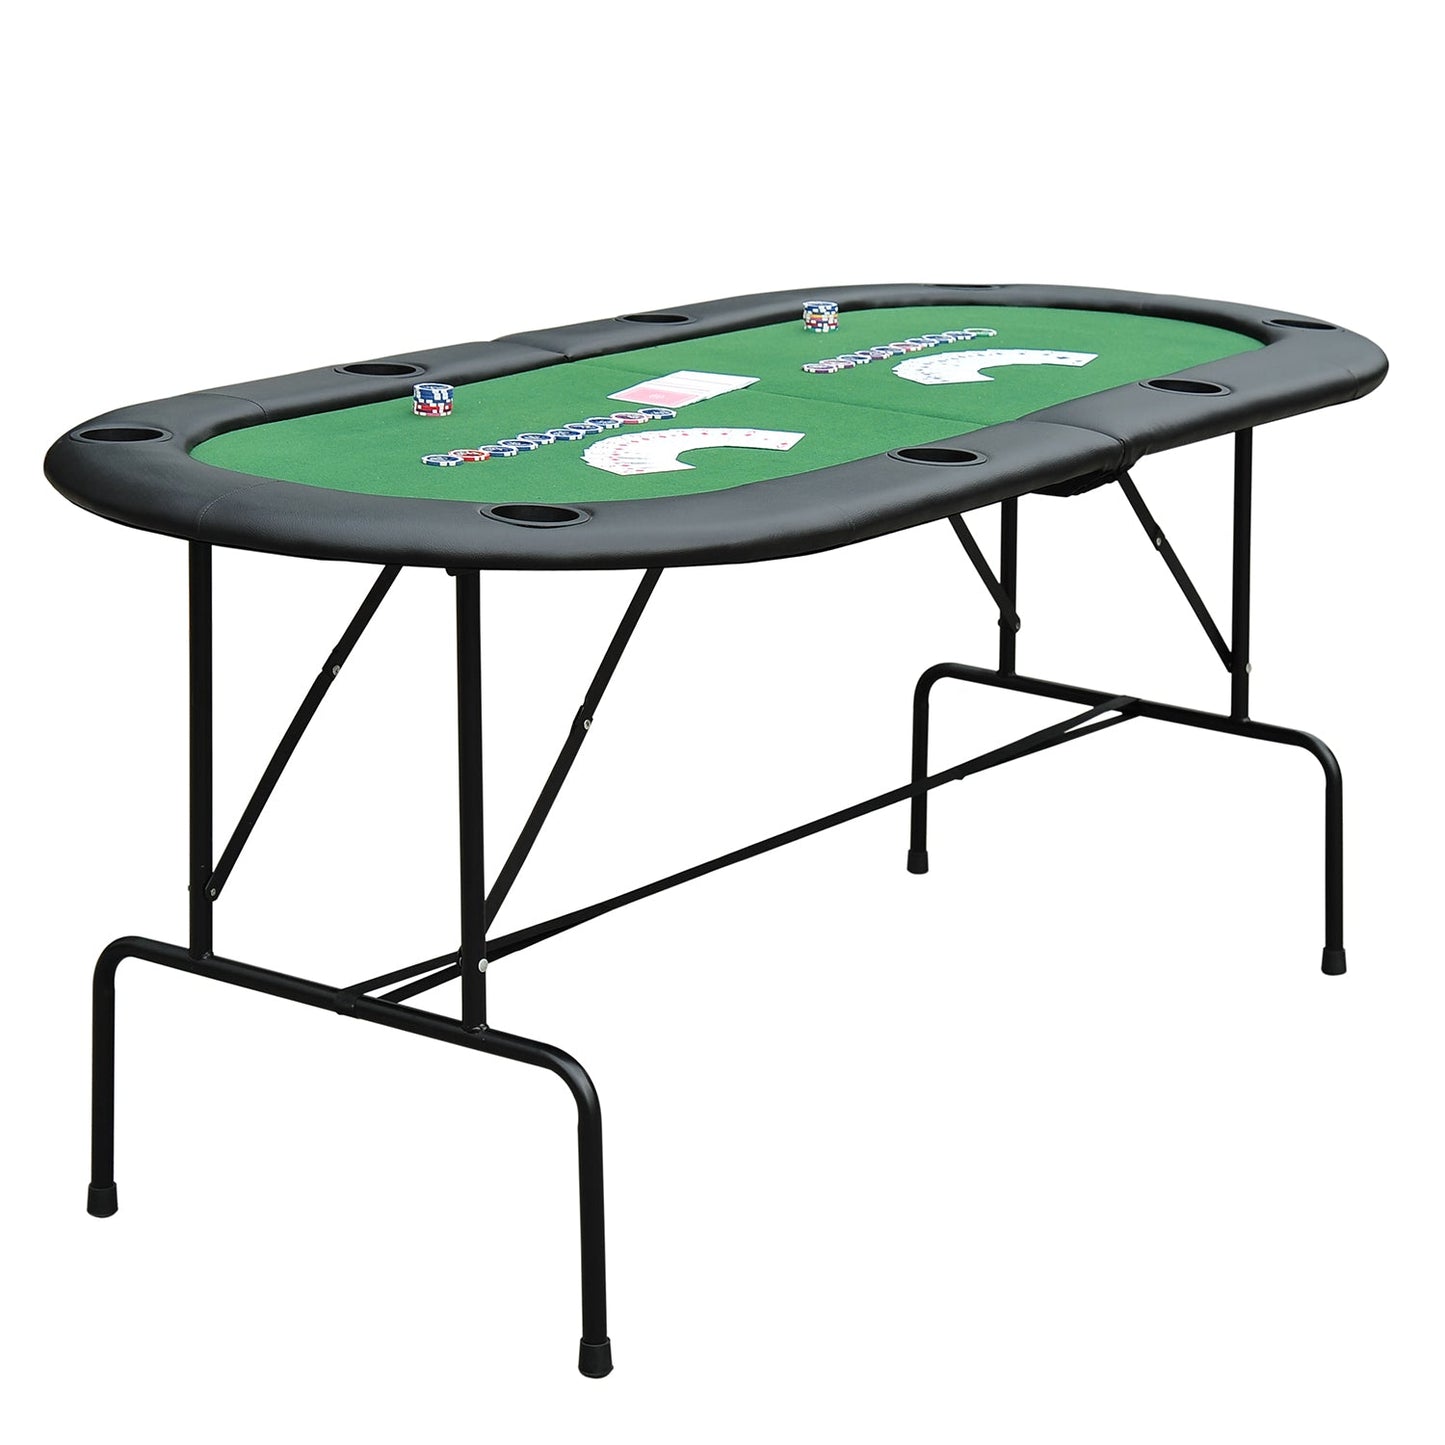 1.83m Foldable Poker Table With Chip Trays, Drink Holders